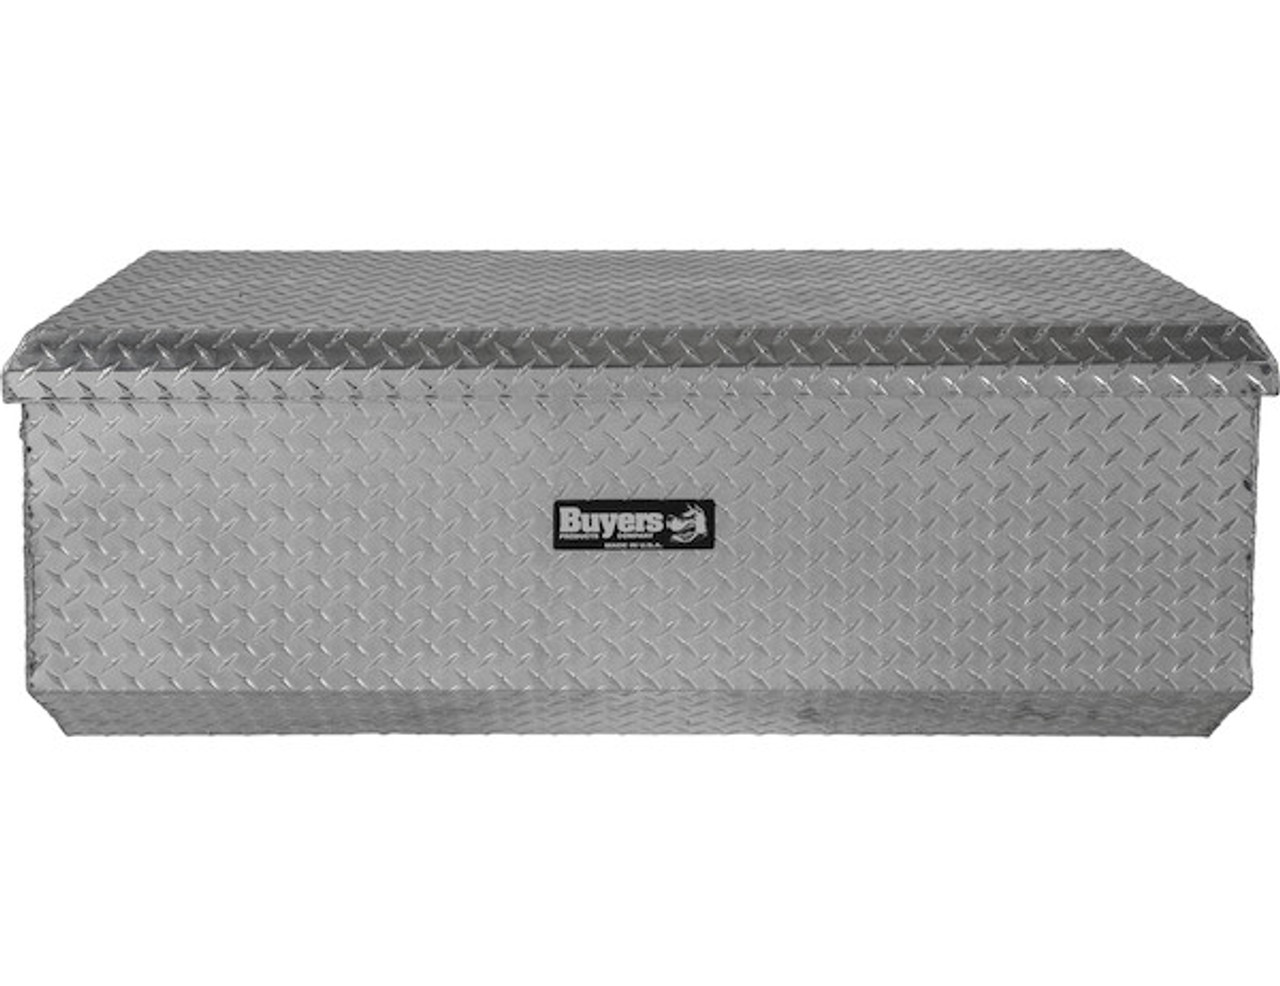 1712020 - 19x20/16x55/54 Inch Diamond Tread Aluminum All-Purpose Chest with Angled Base